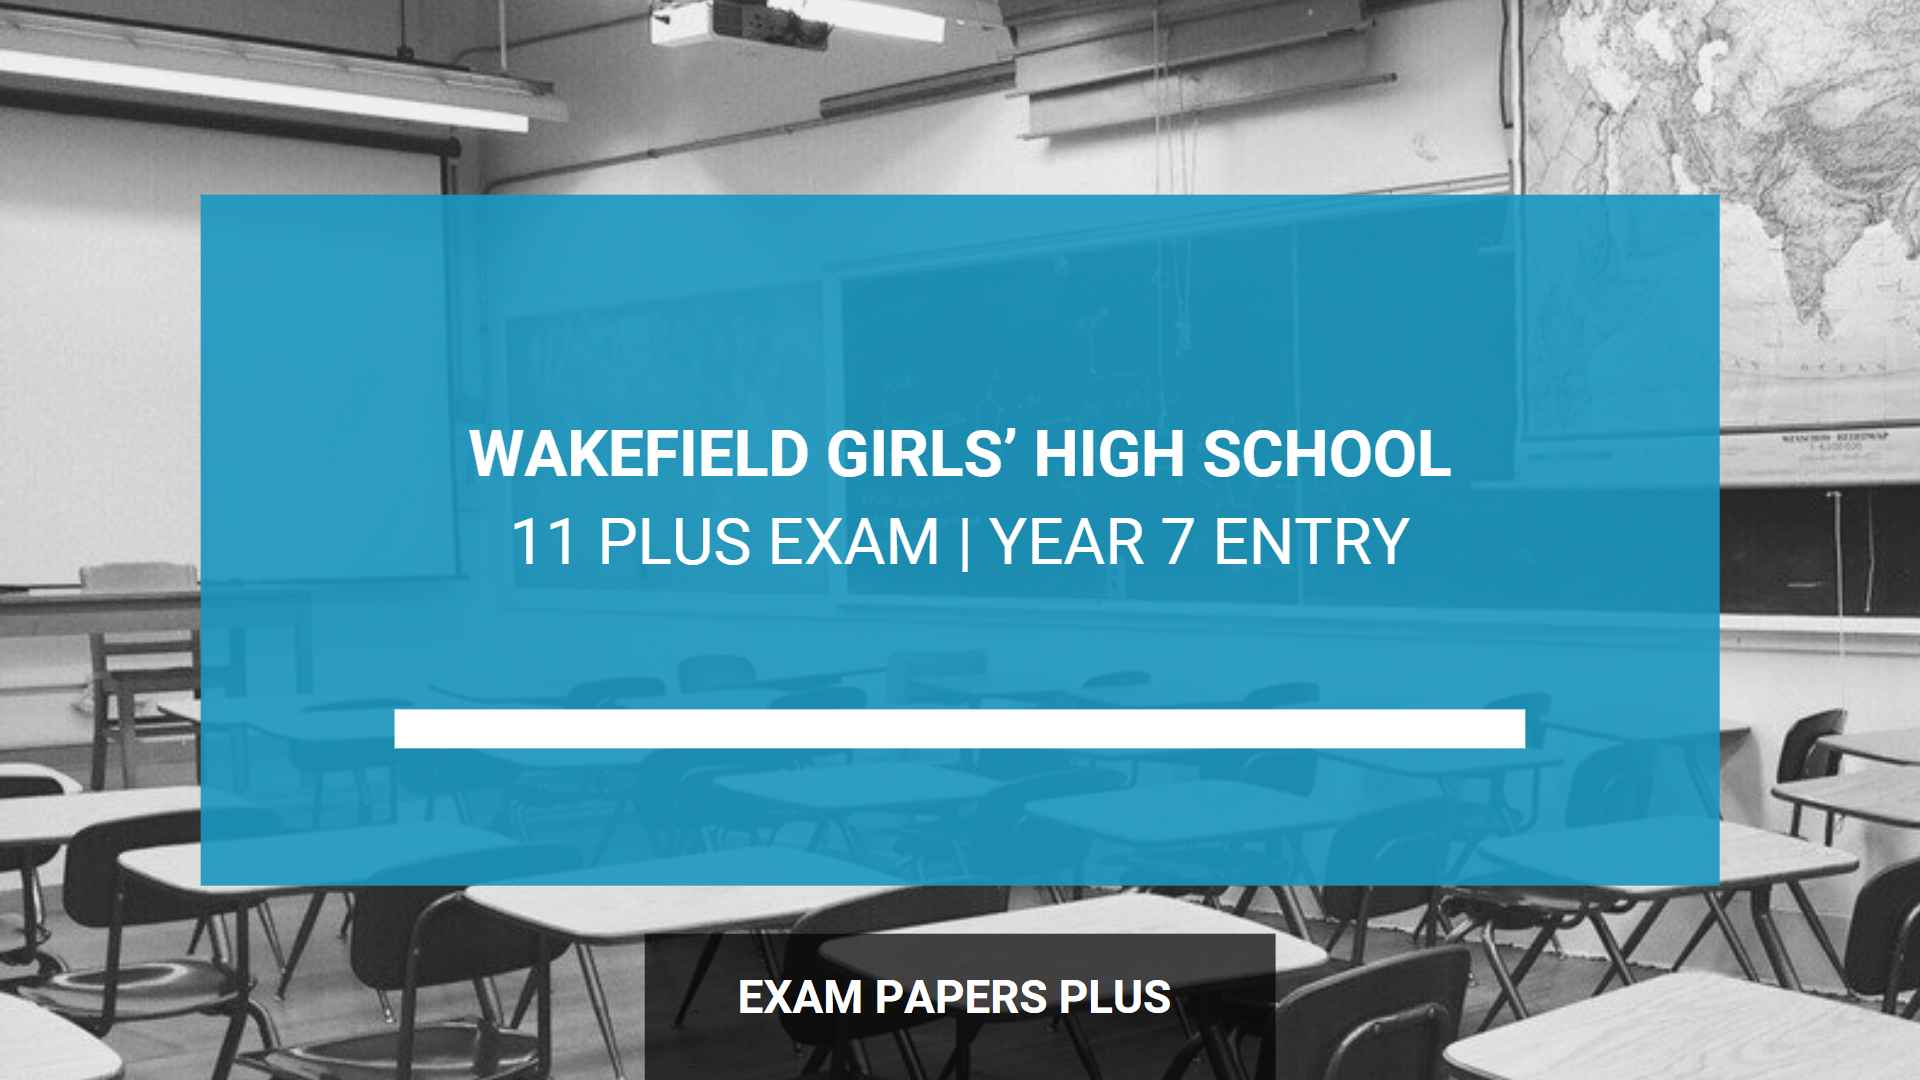 Aims and Values - Wakefield Girls High School